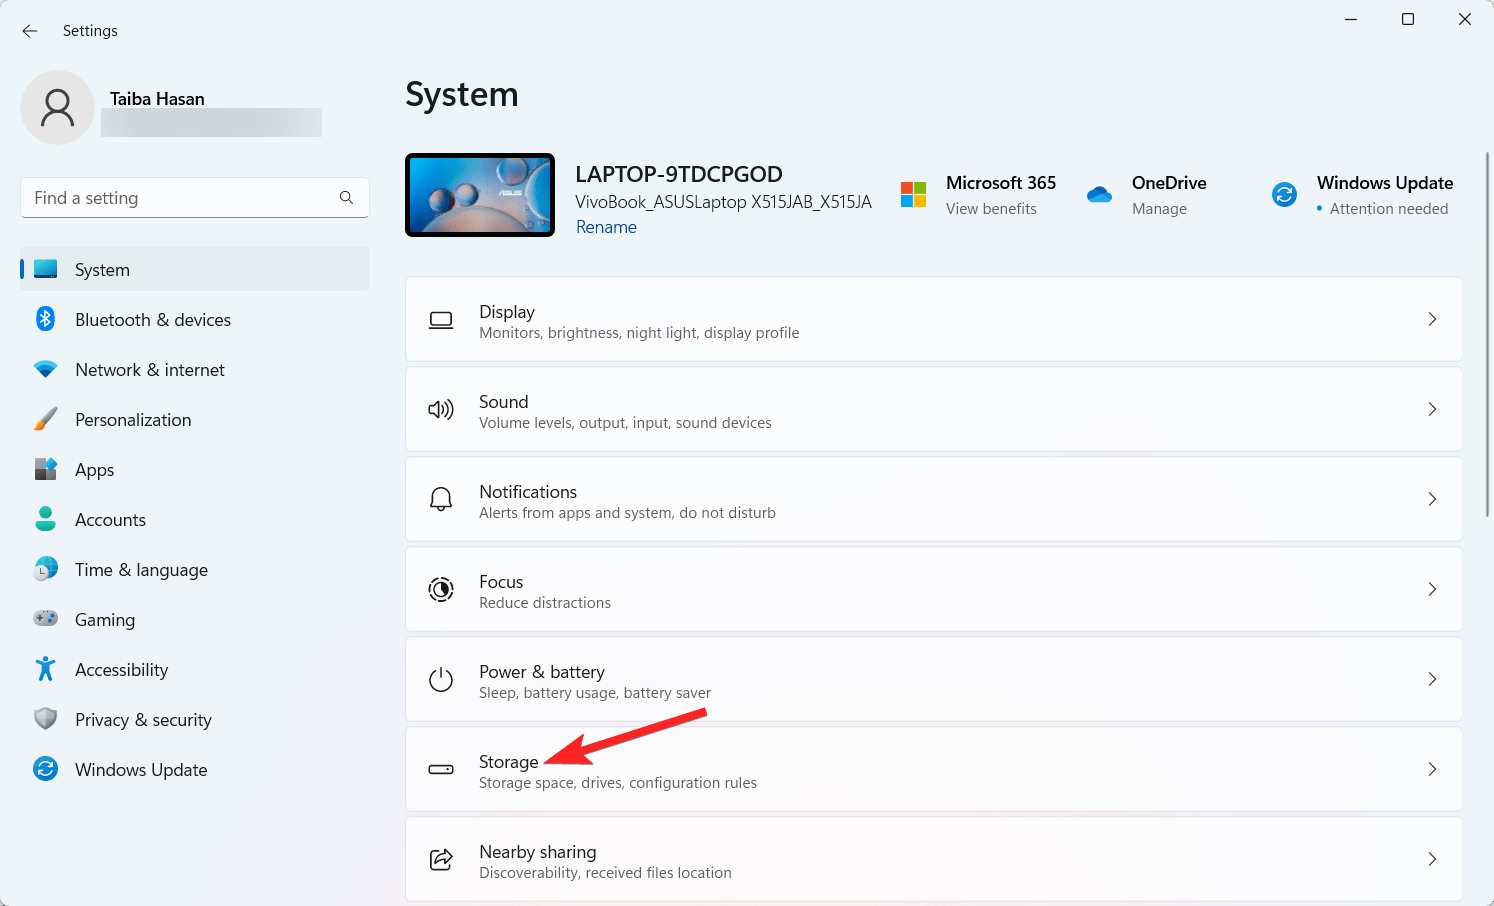 Select Storage option from the System settings